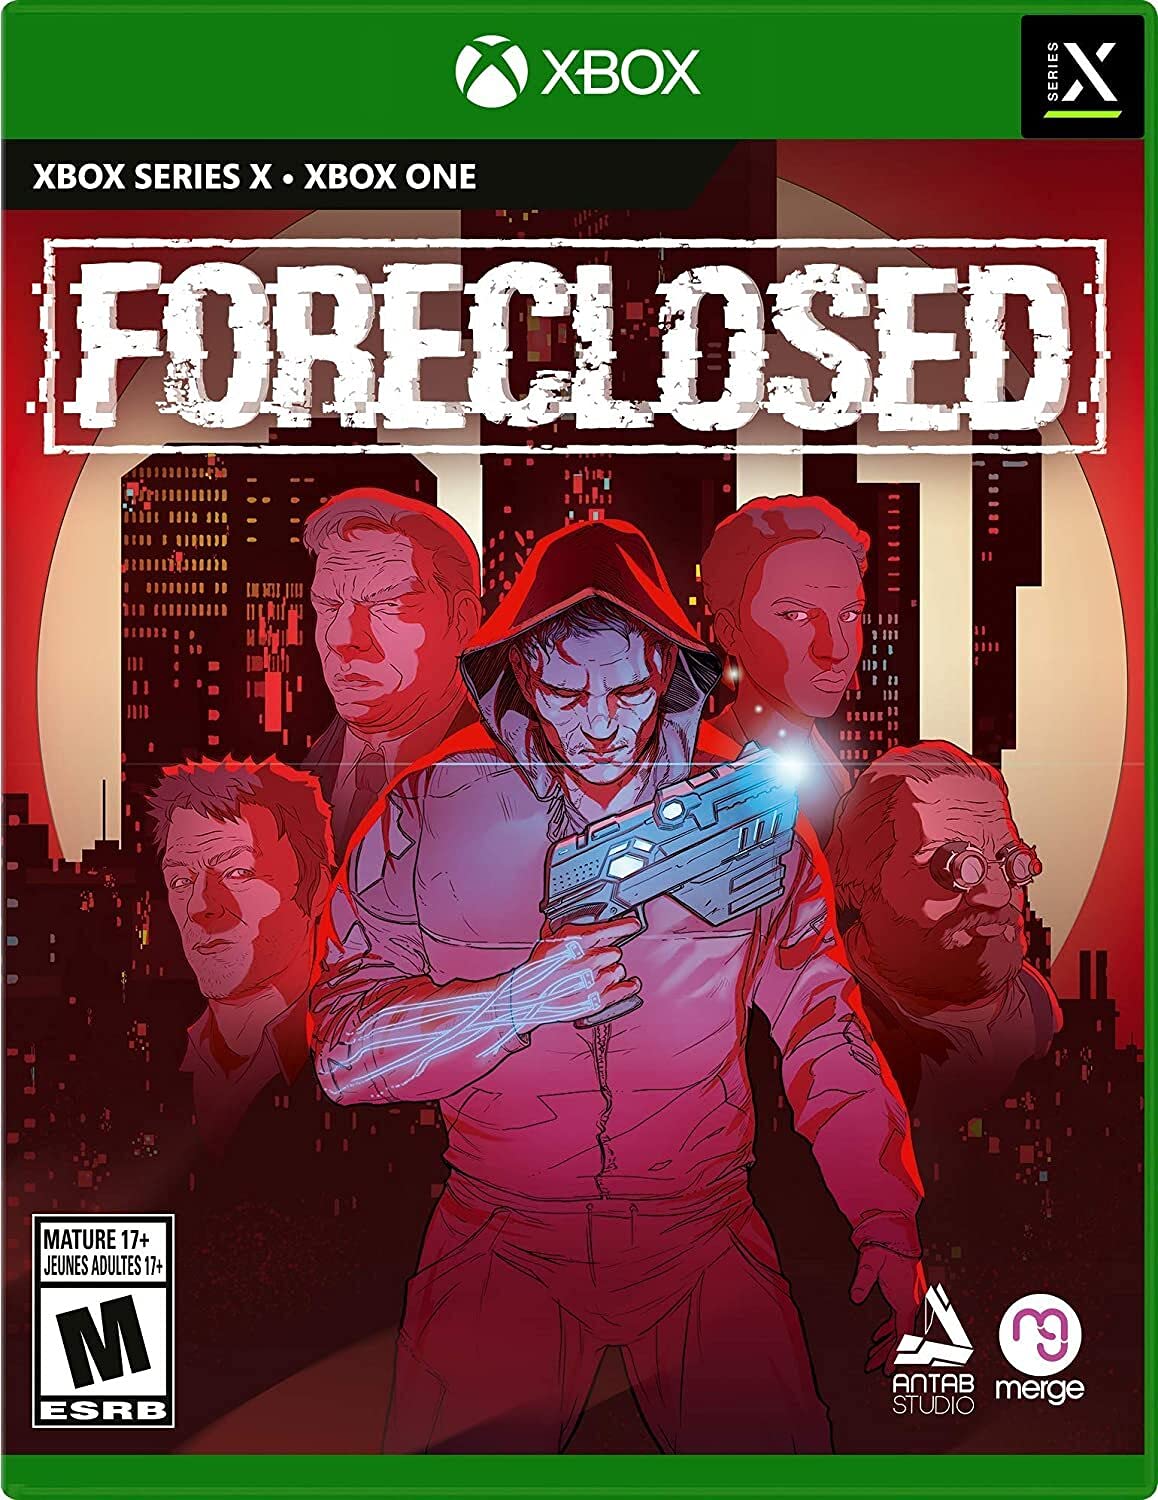 Foreclosed: Standard Edition (Xbox Series X, Physical) $8.03 + Free Shipping w/ Prime or on Orders $35+